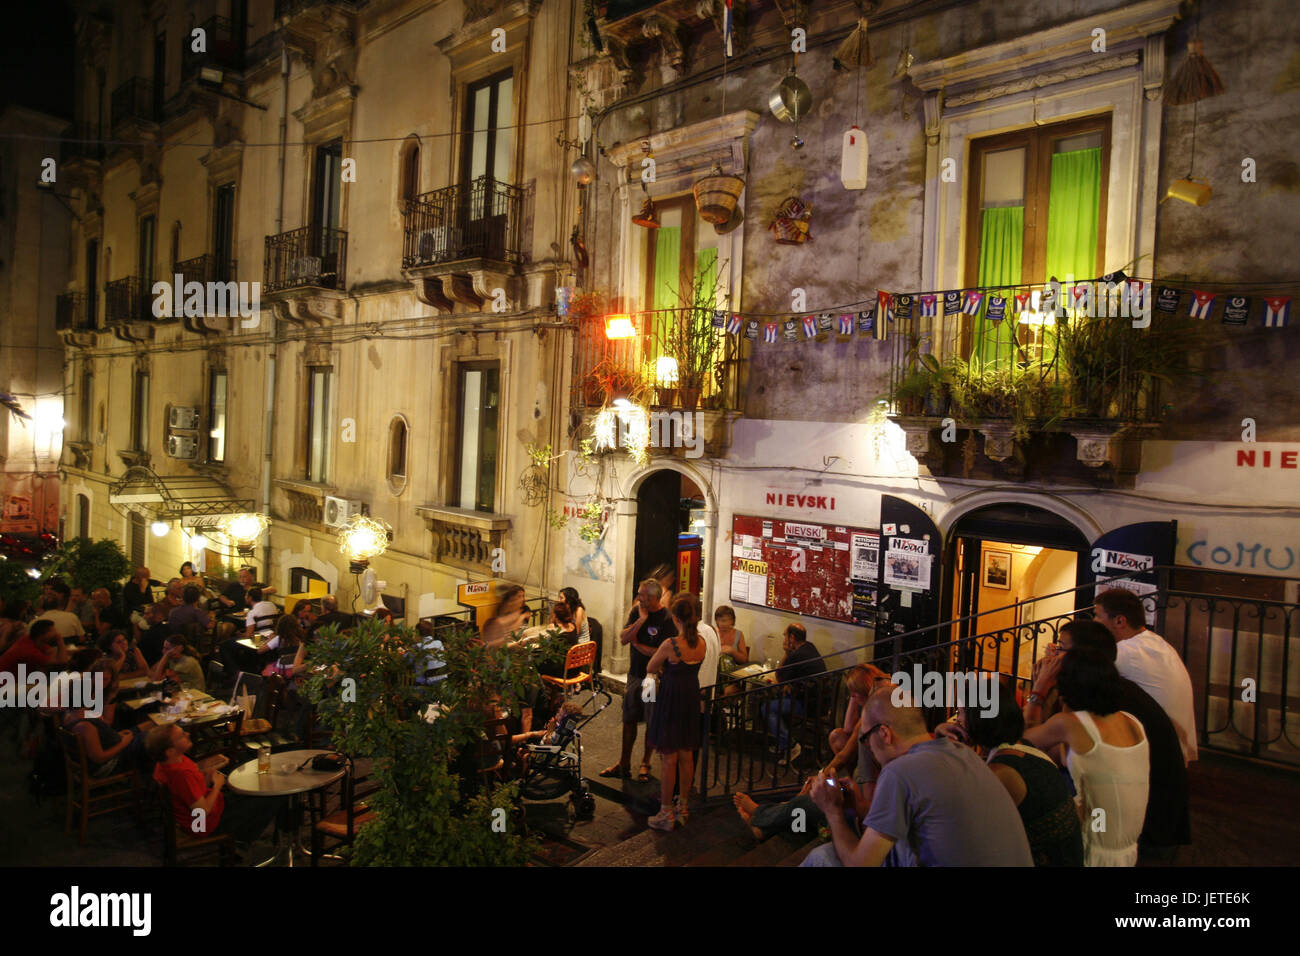 Italy, Sicily, Catania, Old Town, street cafe, tourist, evening, Southern Europe, island, town, houses, buildings, house facades, bar, cafe, restaurant, person, guests, destination, tourism, gastronomy, Stock Photo